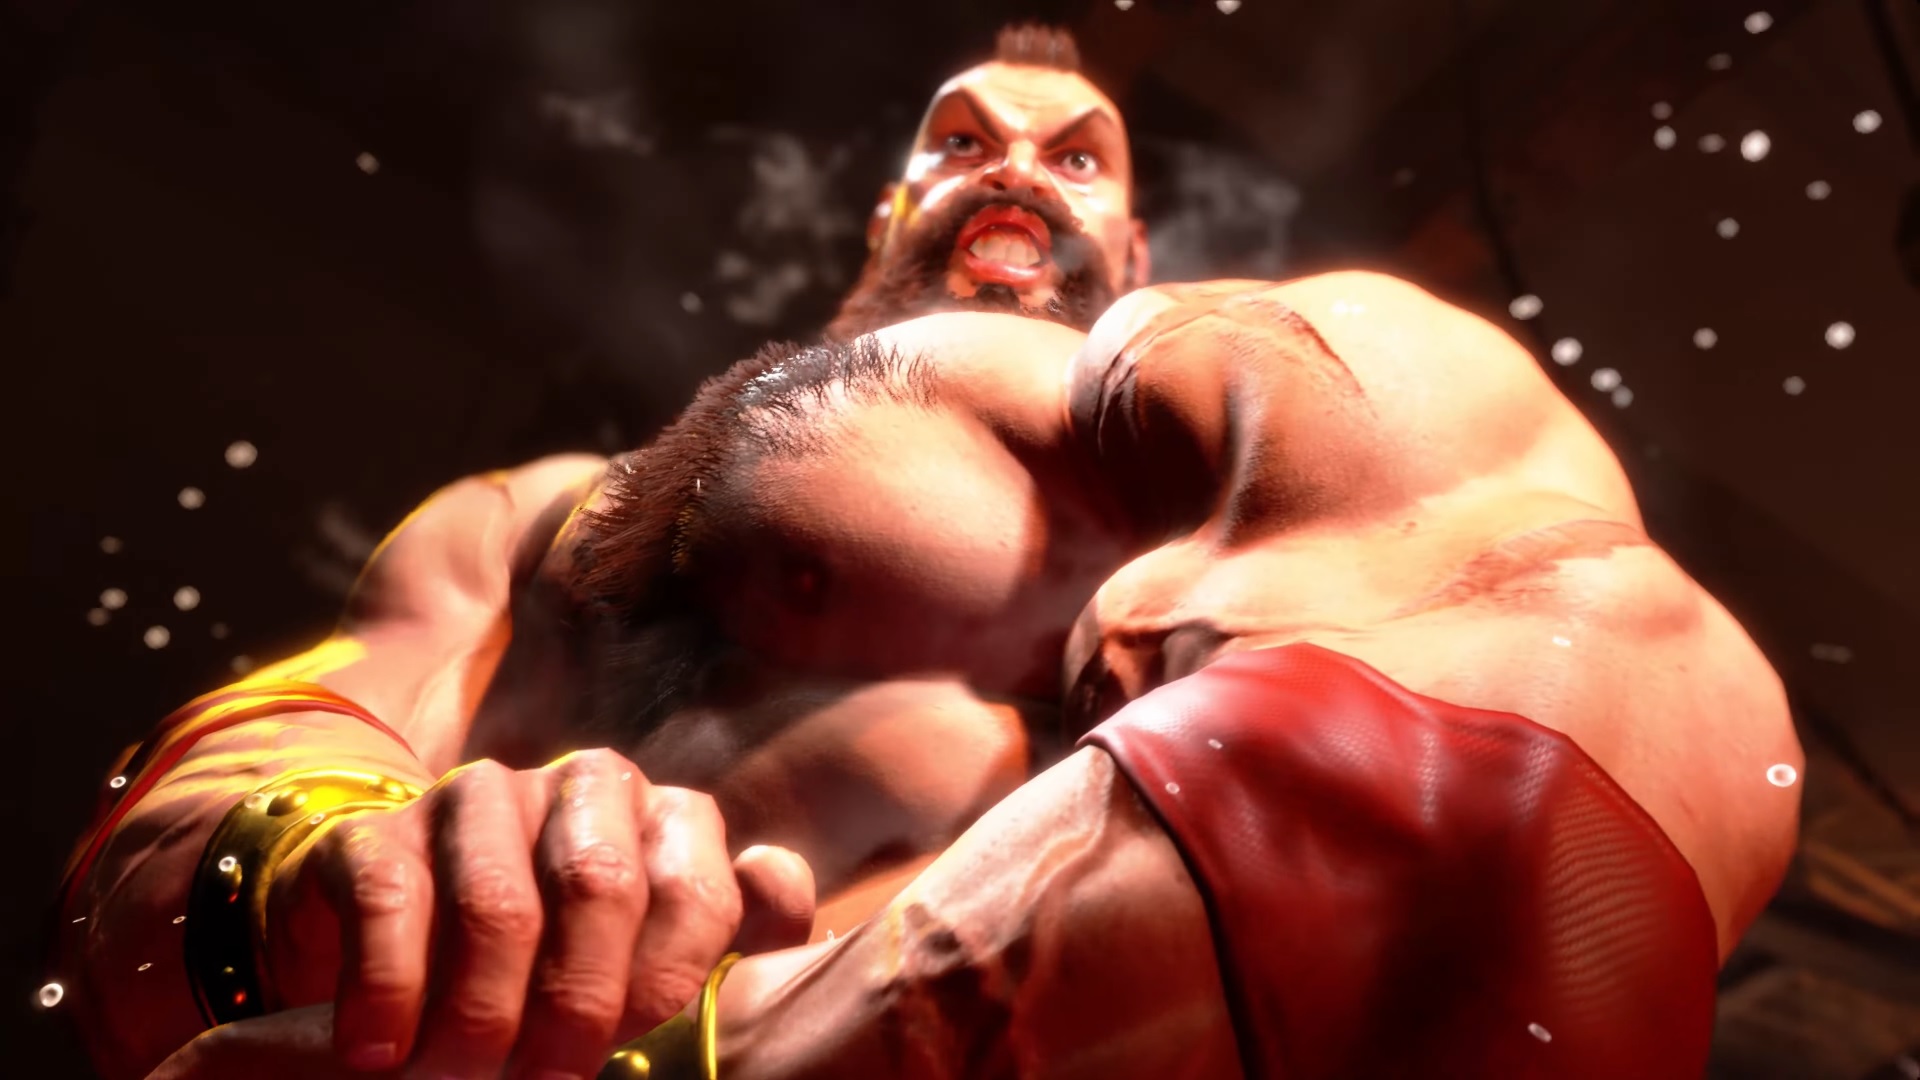 SF6 - Zangief #7 by NgTDat on DeviantArt